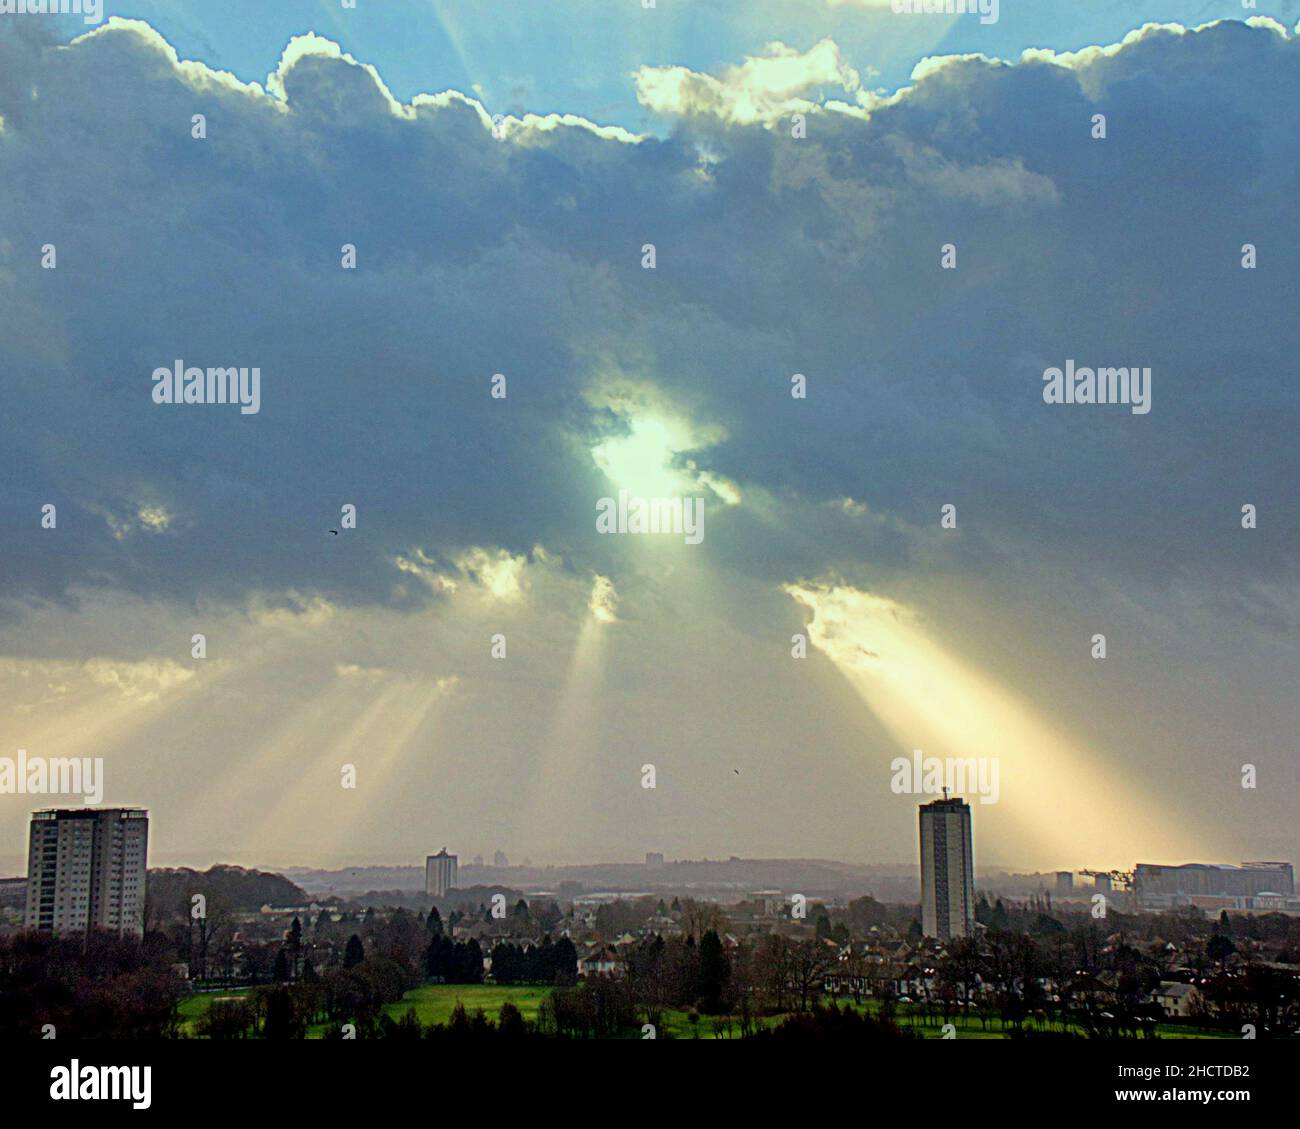 Glasgow, Scotland, UK  1st January, 2021. UK  Weather: God rays on  new year’s day over the high rises and blasting the queen Elizabeth hospital of the south of the city, desolate covid new year also known as sunbeams they are Crepuscular rays. Credit Gerard Ferry/Alamy Live News Stock Photo